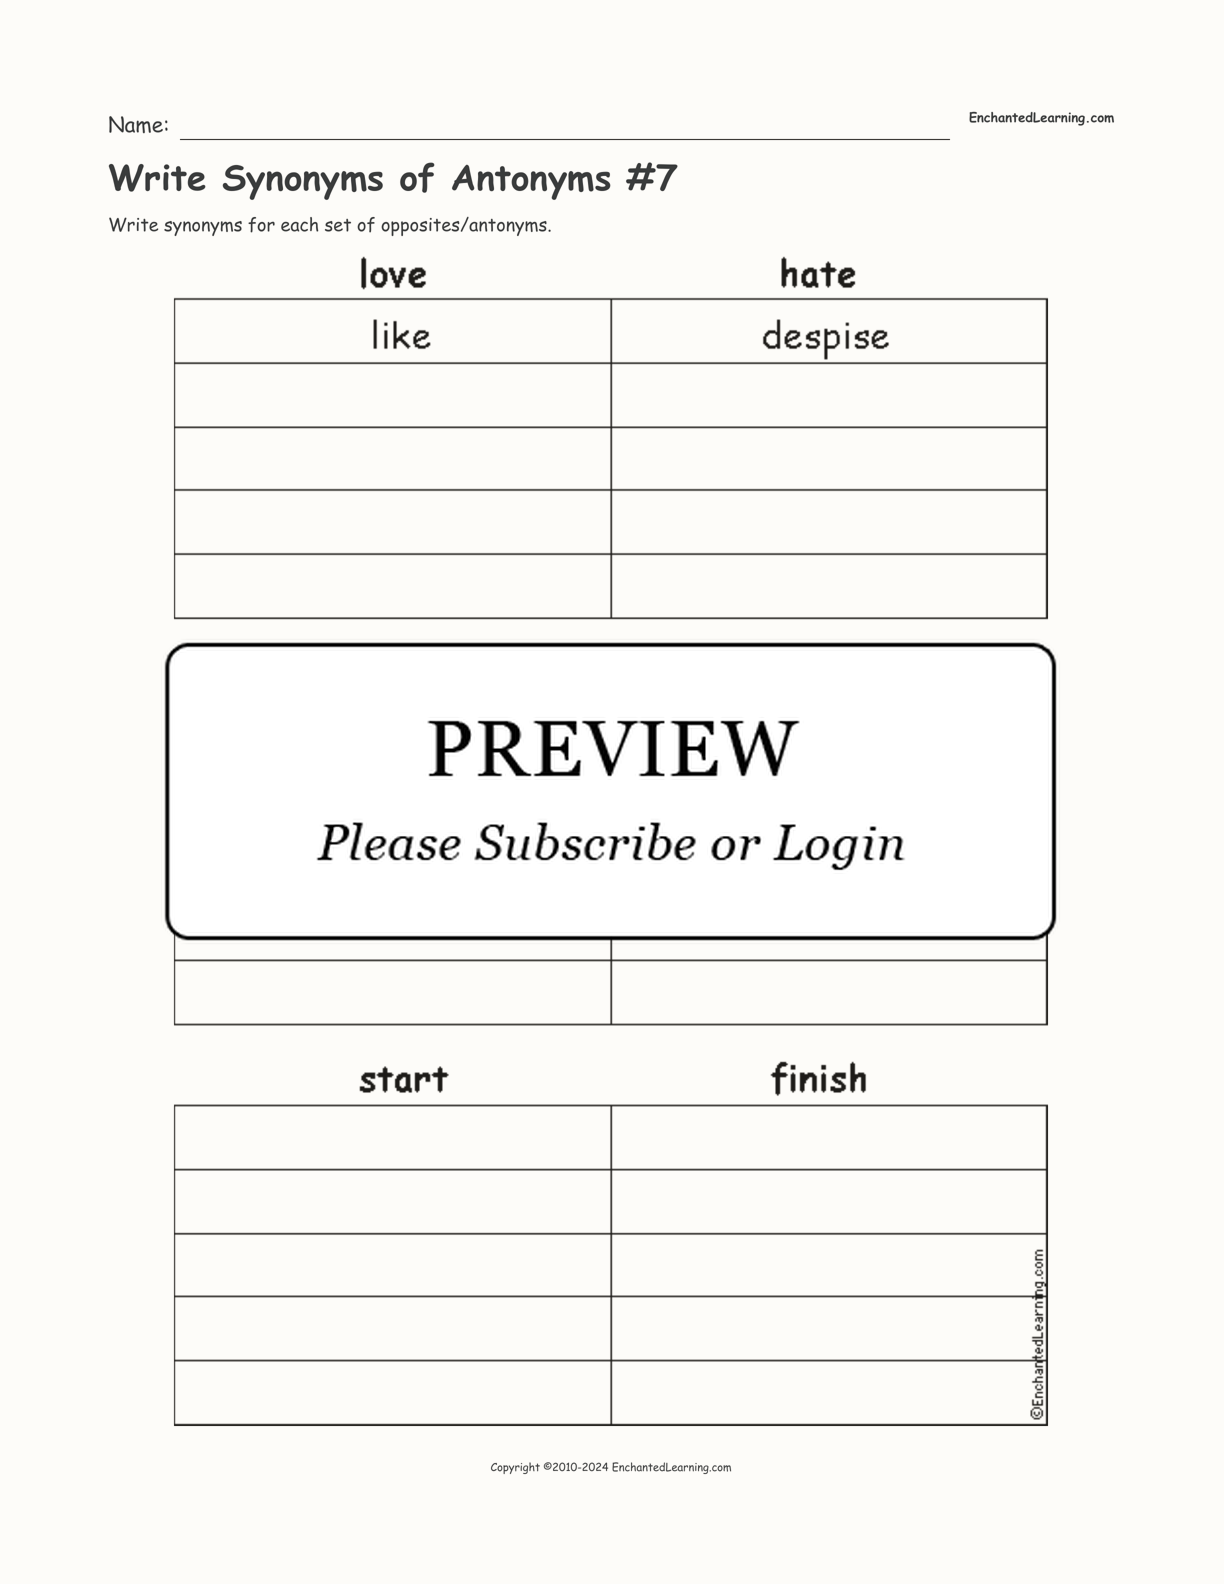 Write Synonyms of Antonyms #7 interactive worksheet page 1